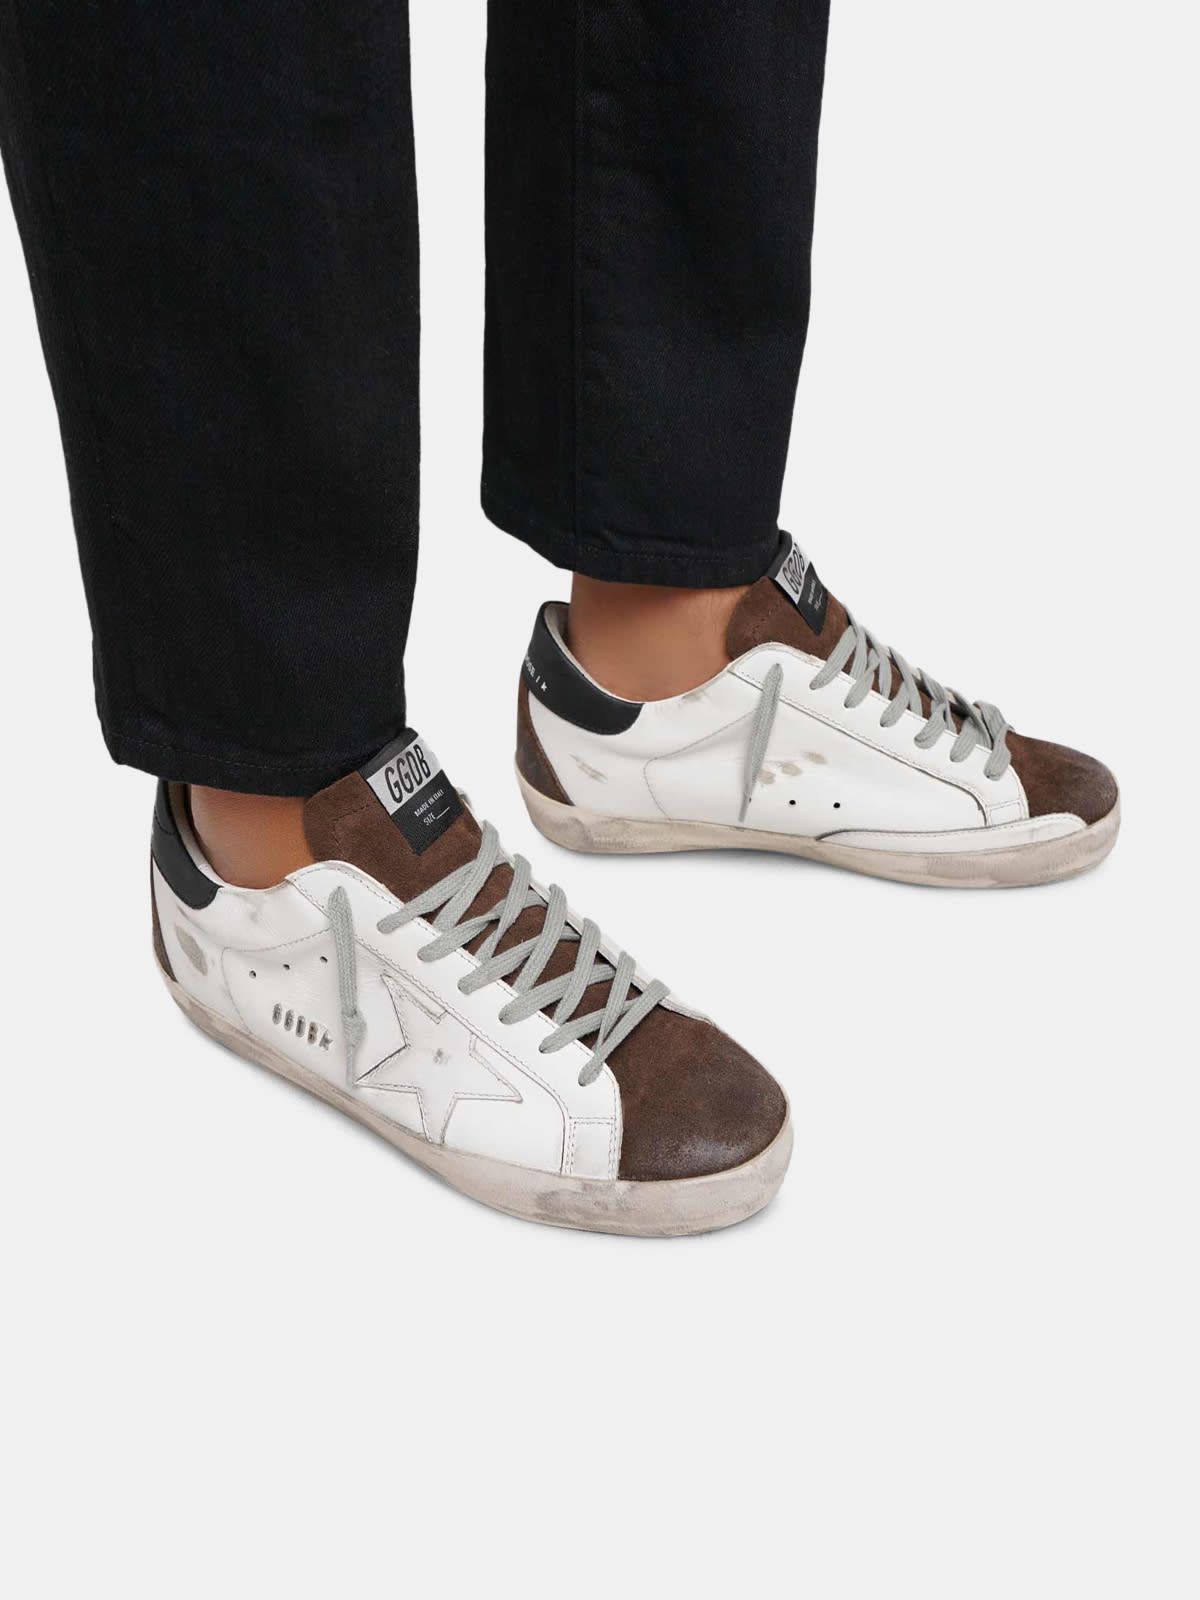 Two-tone white and brown Super-Star sneakers